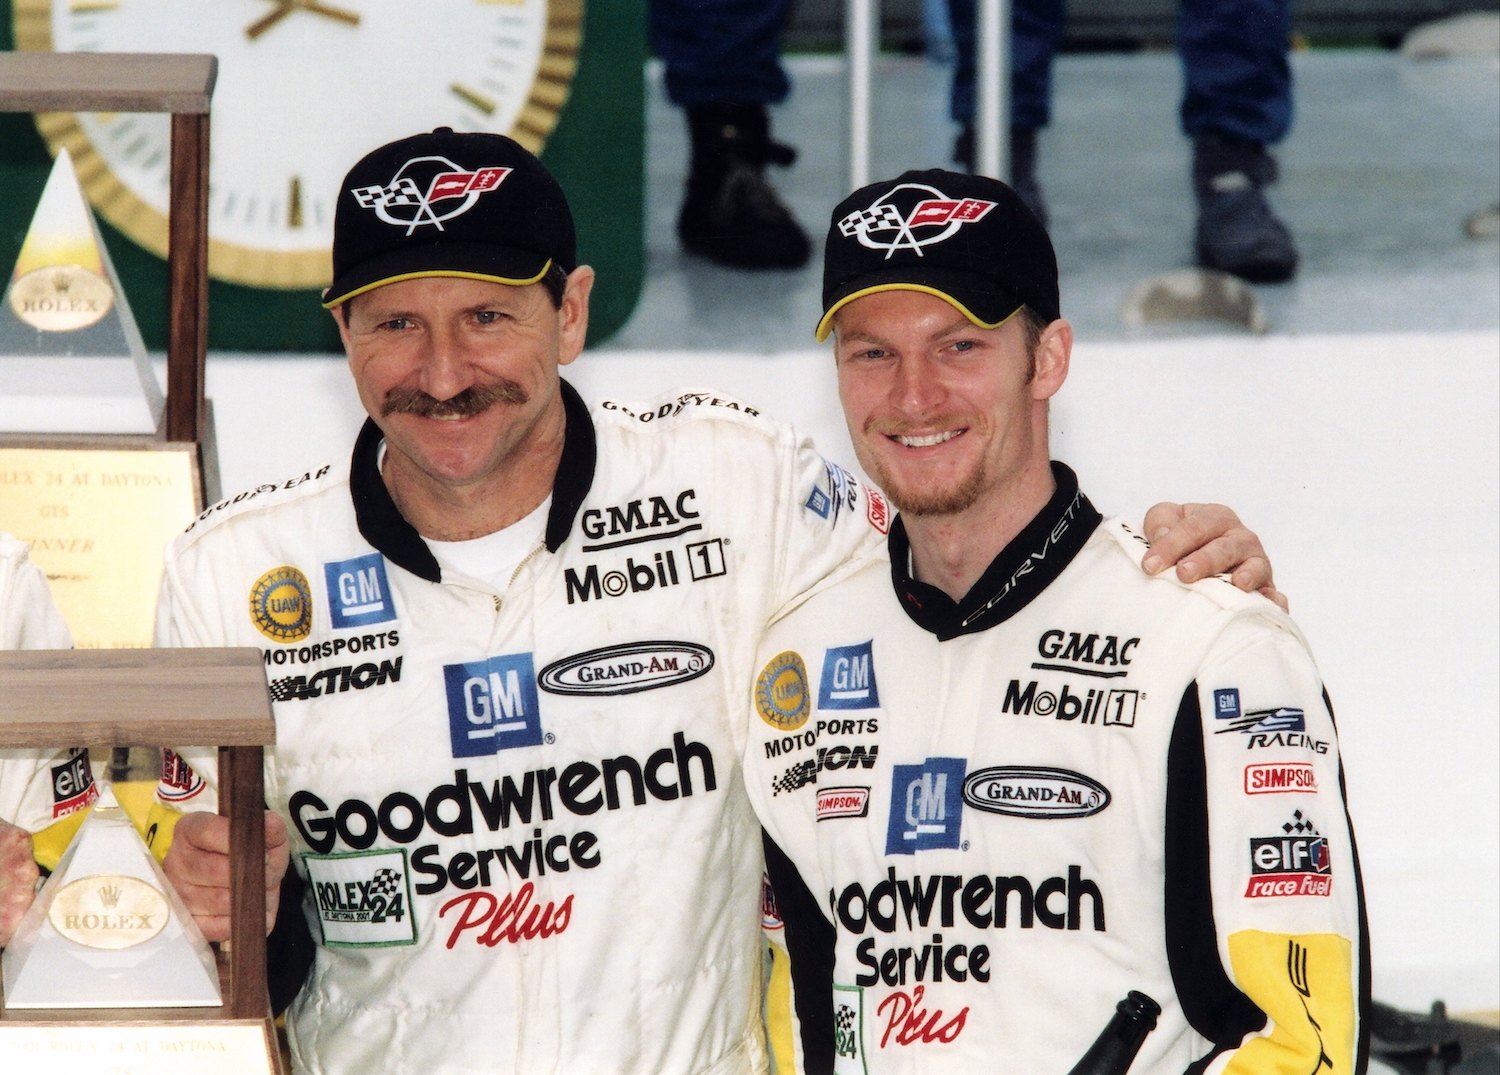 Dale Earnhardt Sr. and Dale Earnhardt Jr. are both NASCAR legends, but which Earnhardt earned more career wins on the big circuit?